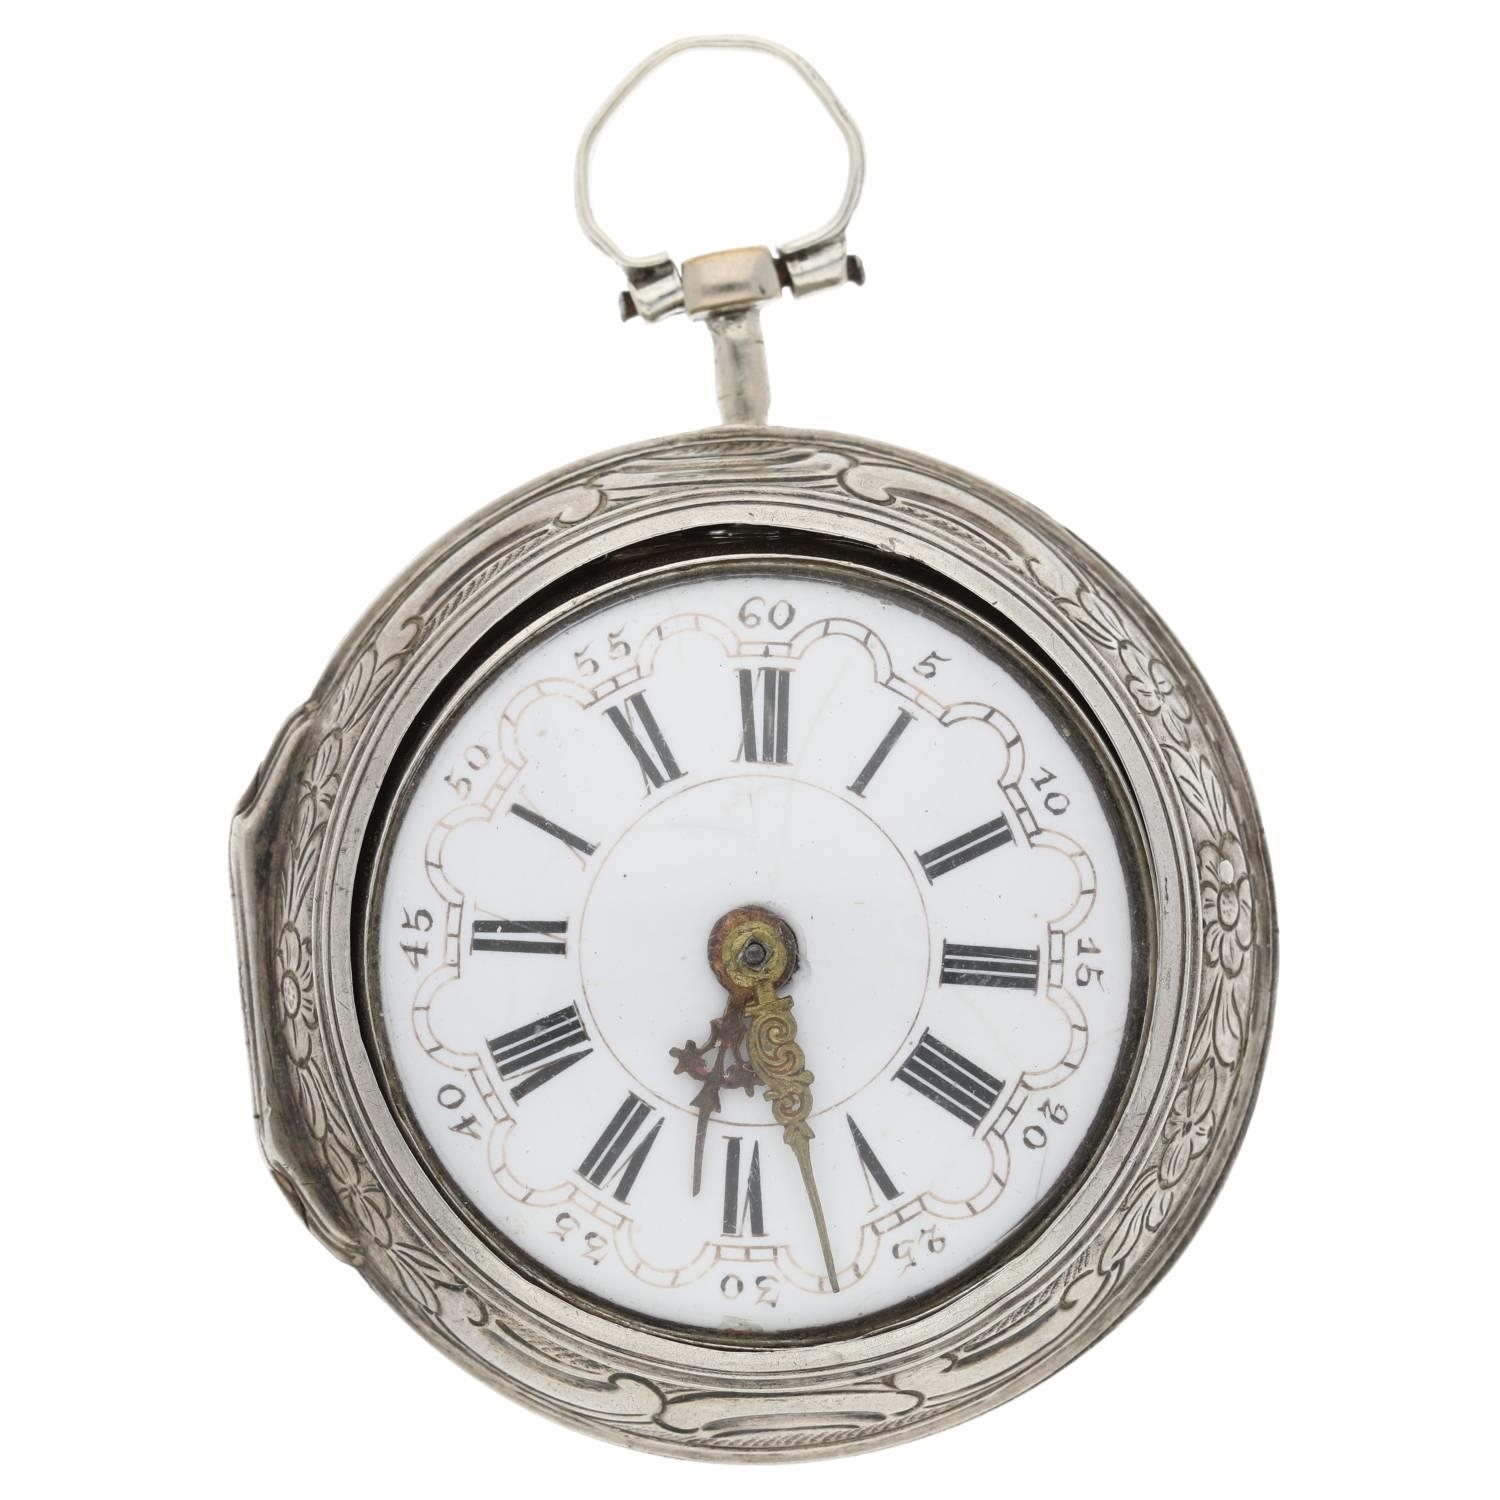 John Wilter, London - George II English silver repoussé pair cased verge pocket watch, London - Image 2 of 10